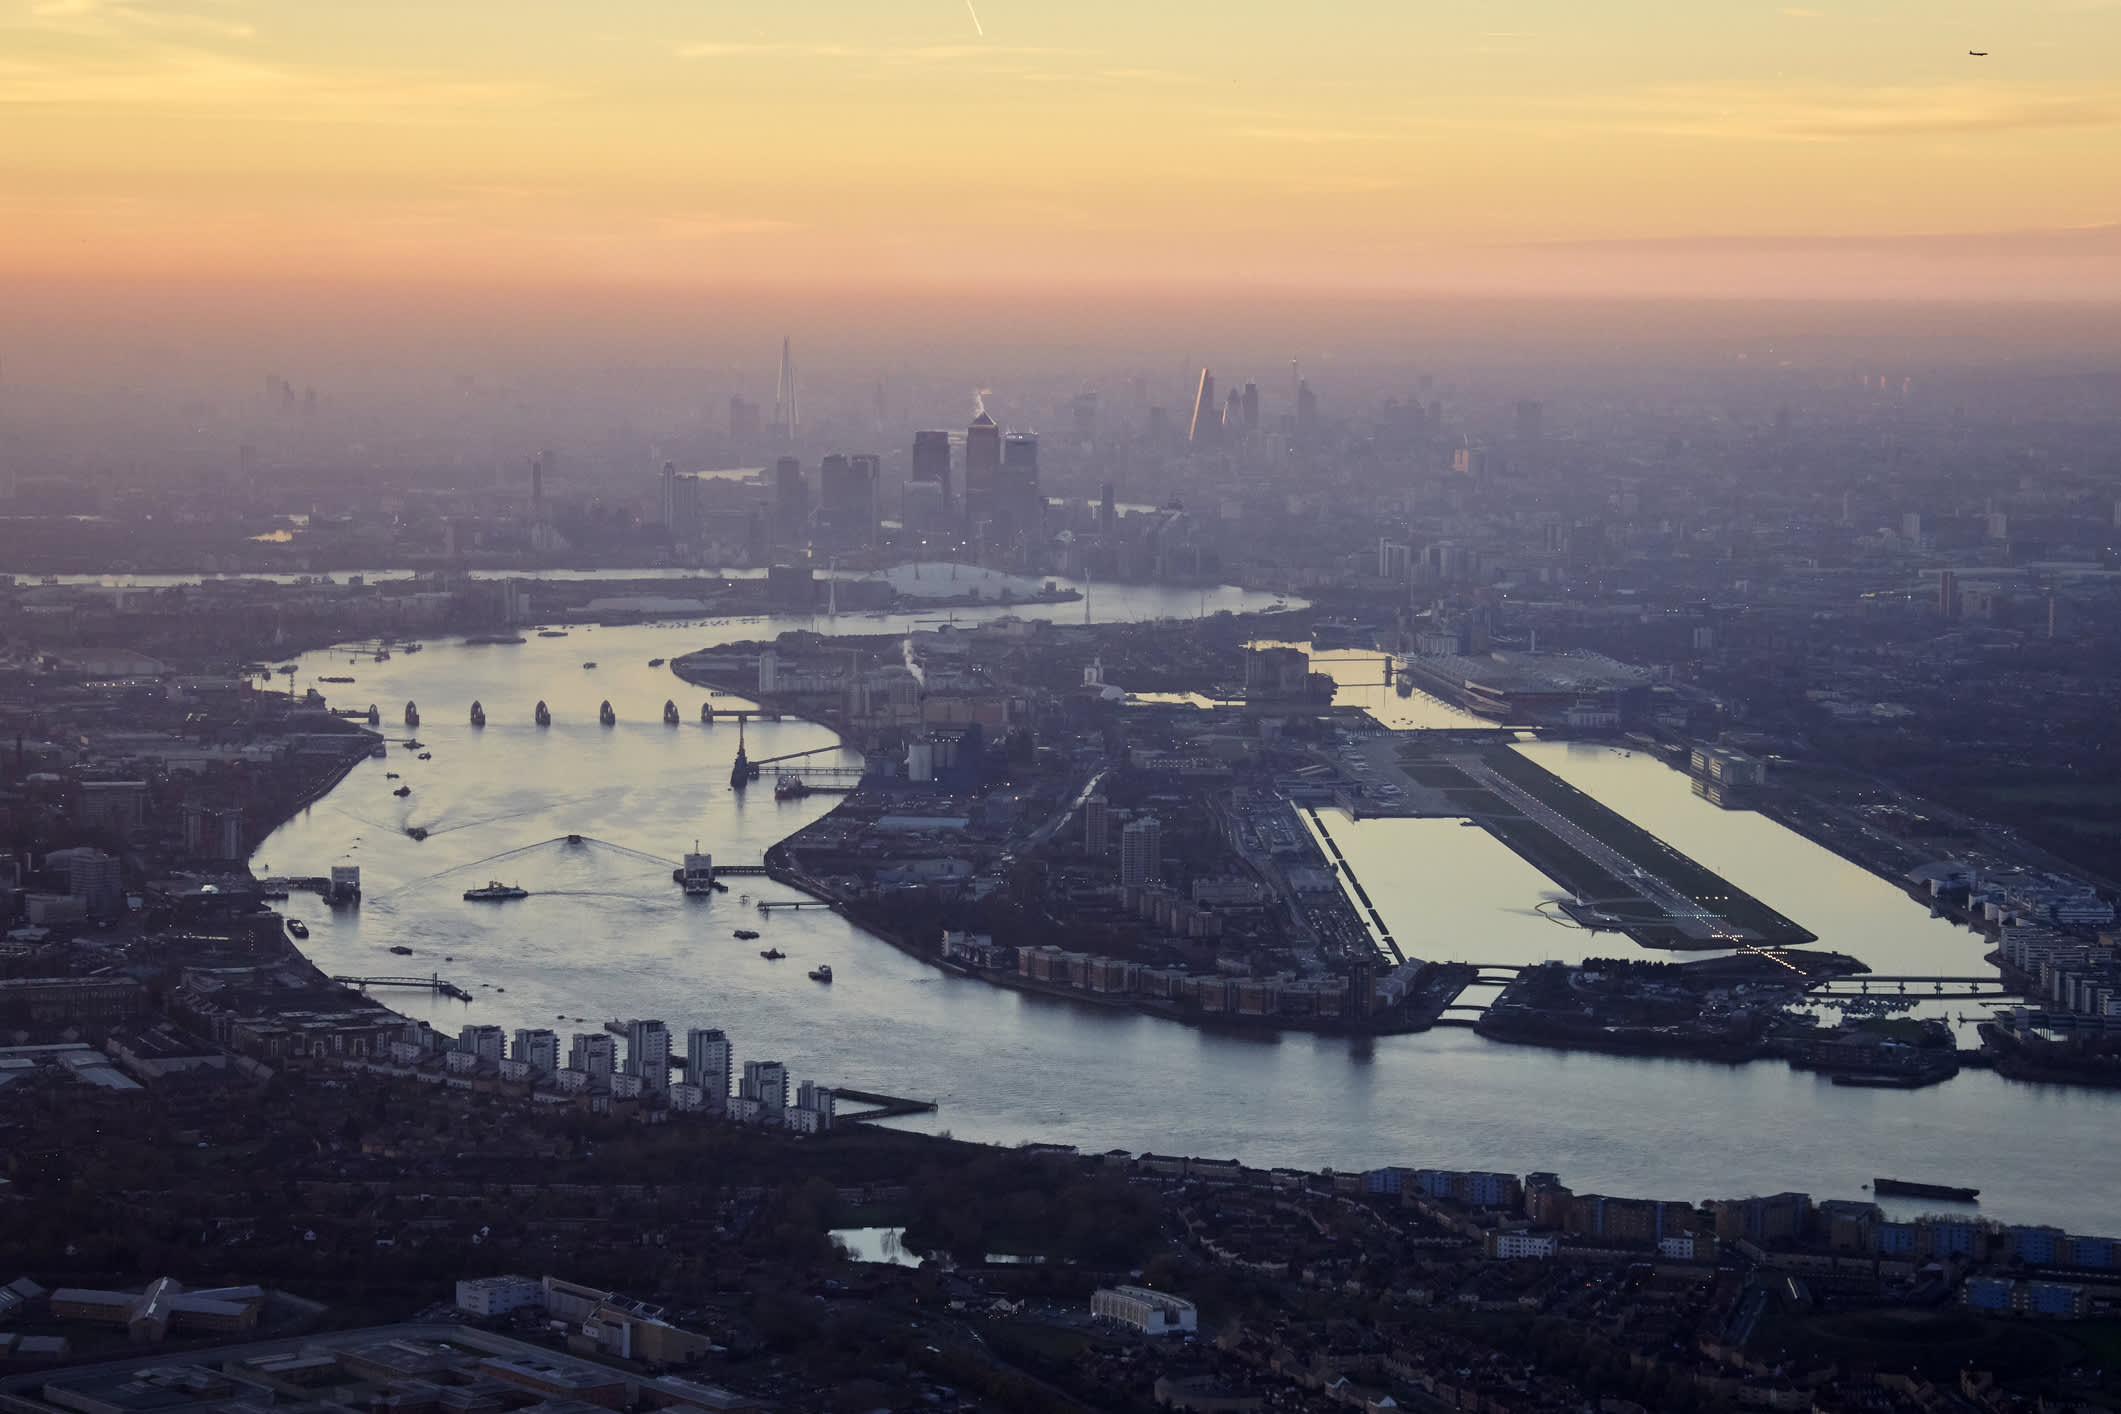 London's River Thames set to trial new tidal energy technologies